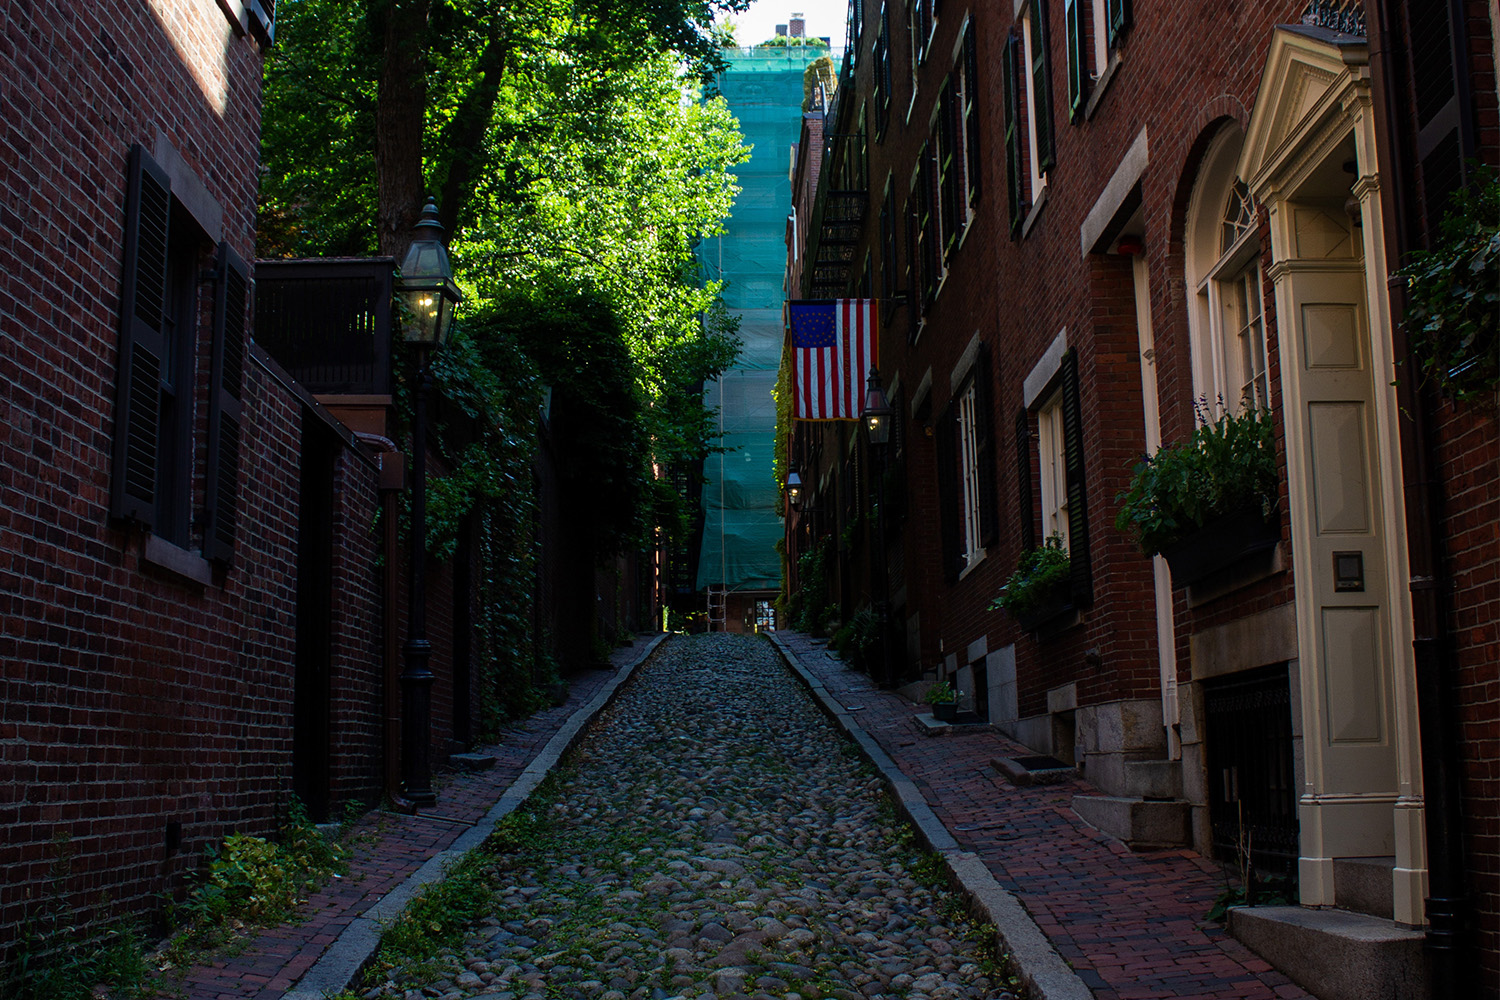 Dusk shot of Beacon Hill homes in Boston, with a mossy cobblestone in the middle